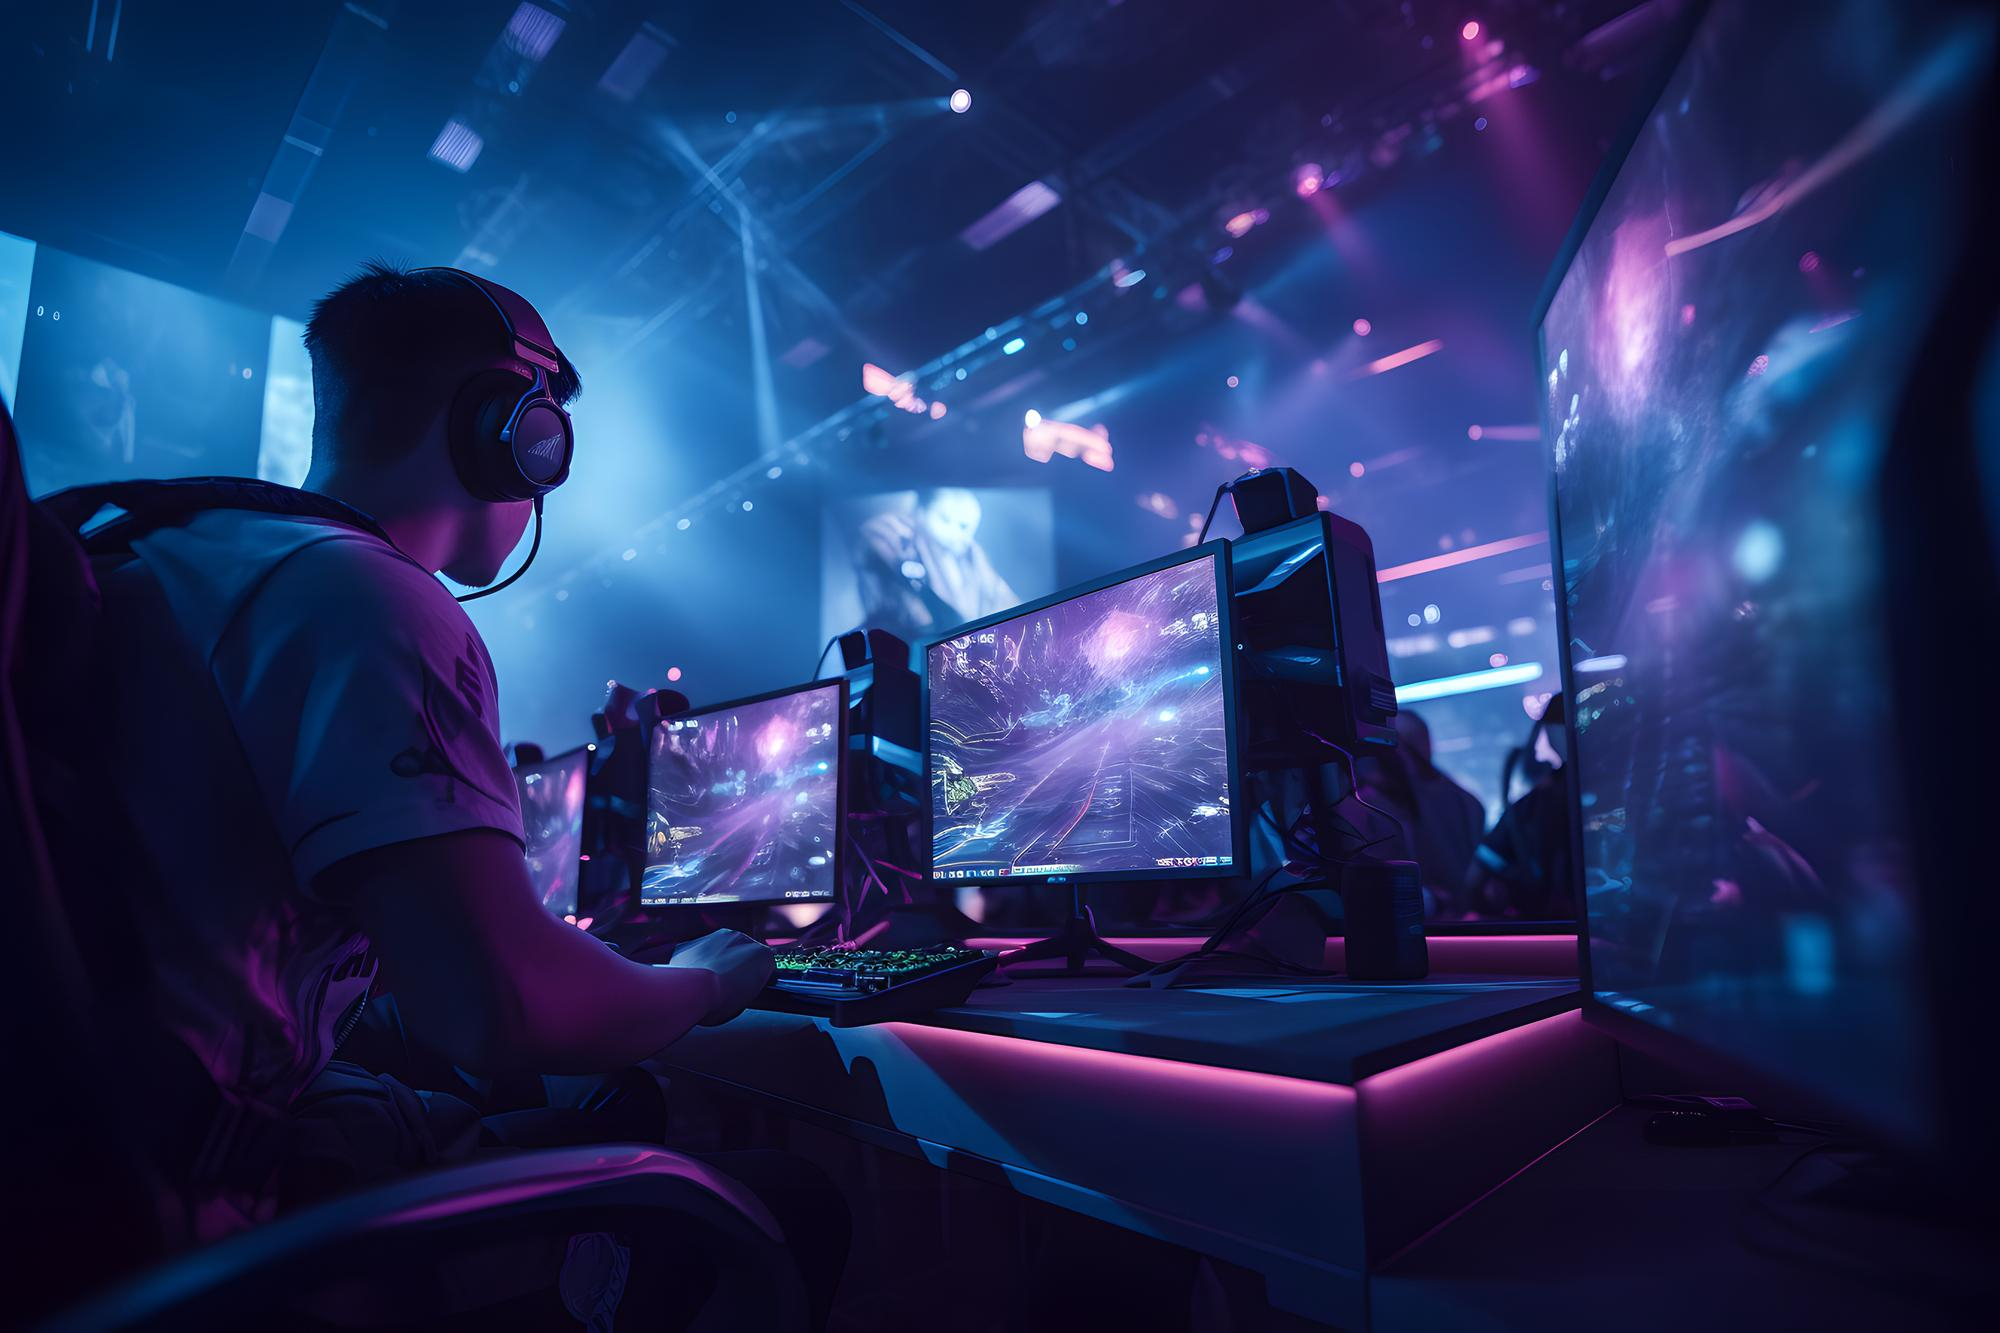 Gaming Person wearing headphones and playing a video game on multiple monitors in a dark, neon-lit gaming environment.